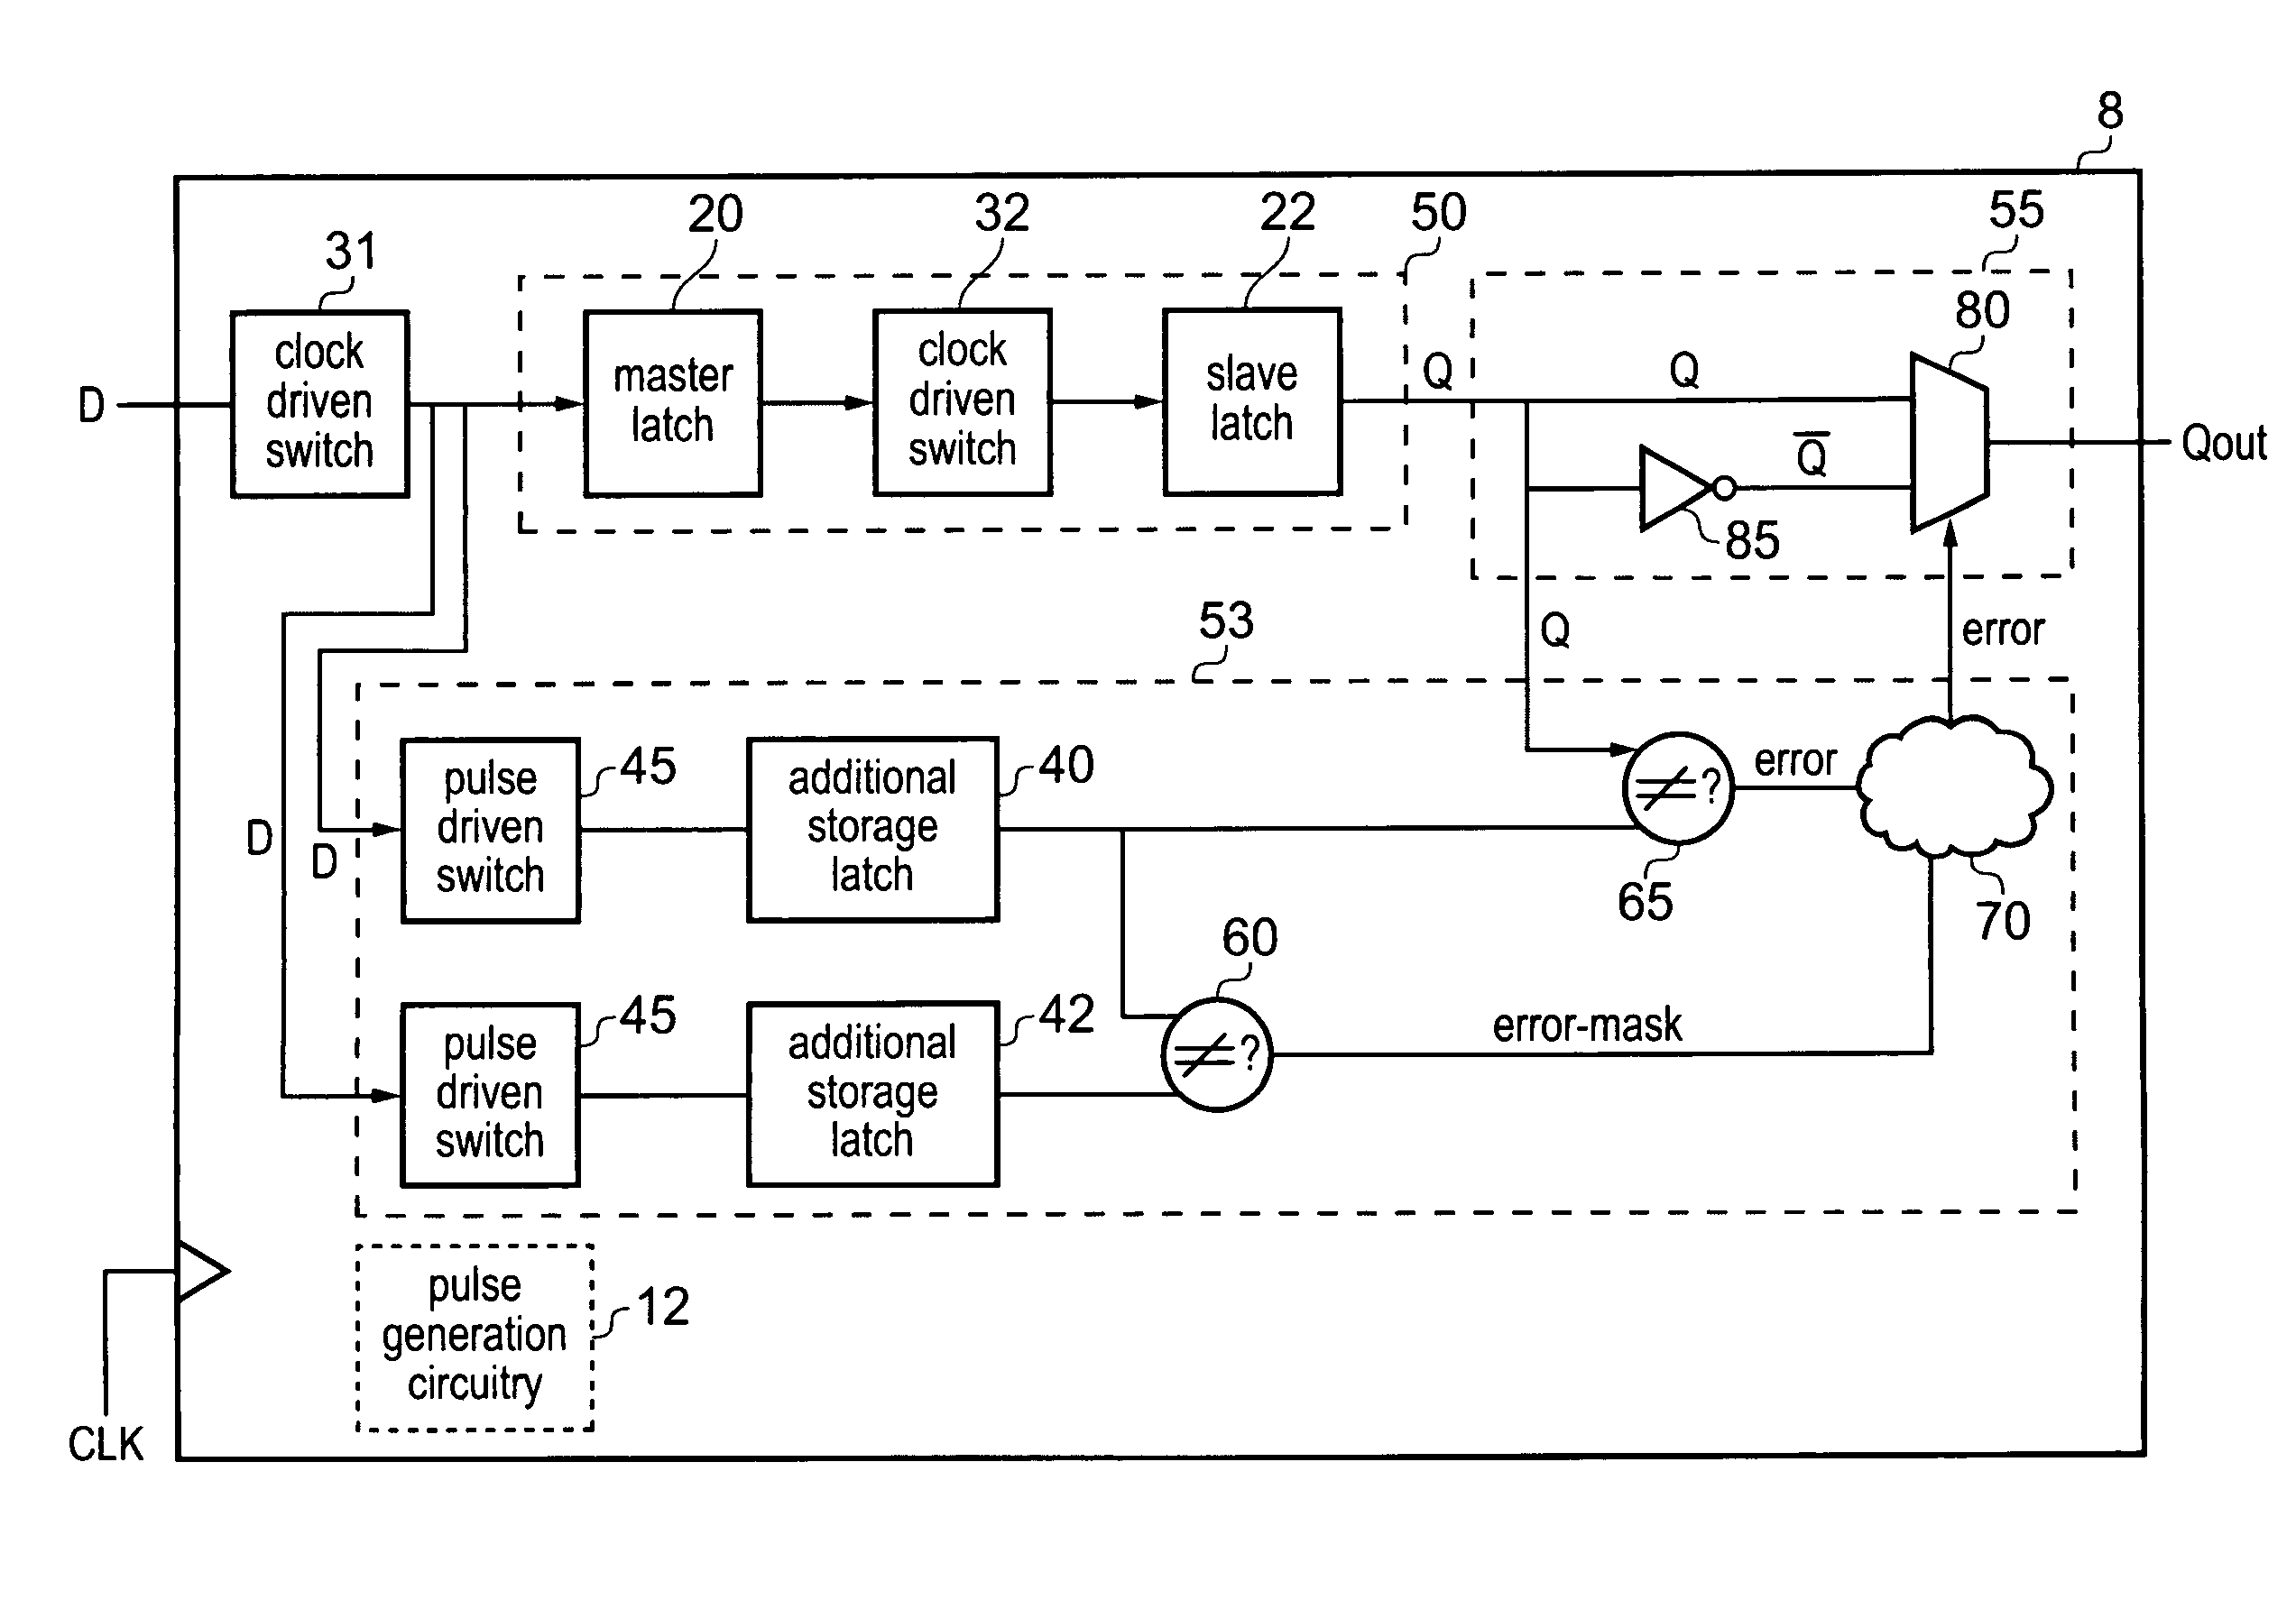 Correction of single event upset error within sequential storage circuitry of an integrated circuit